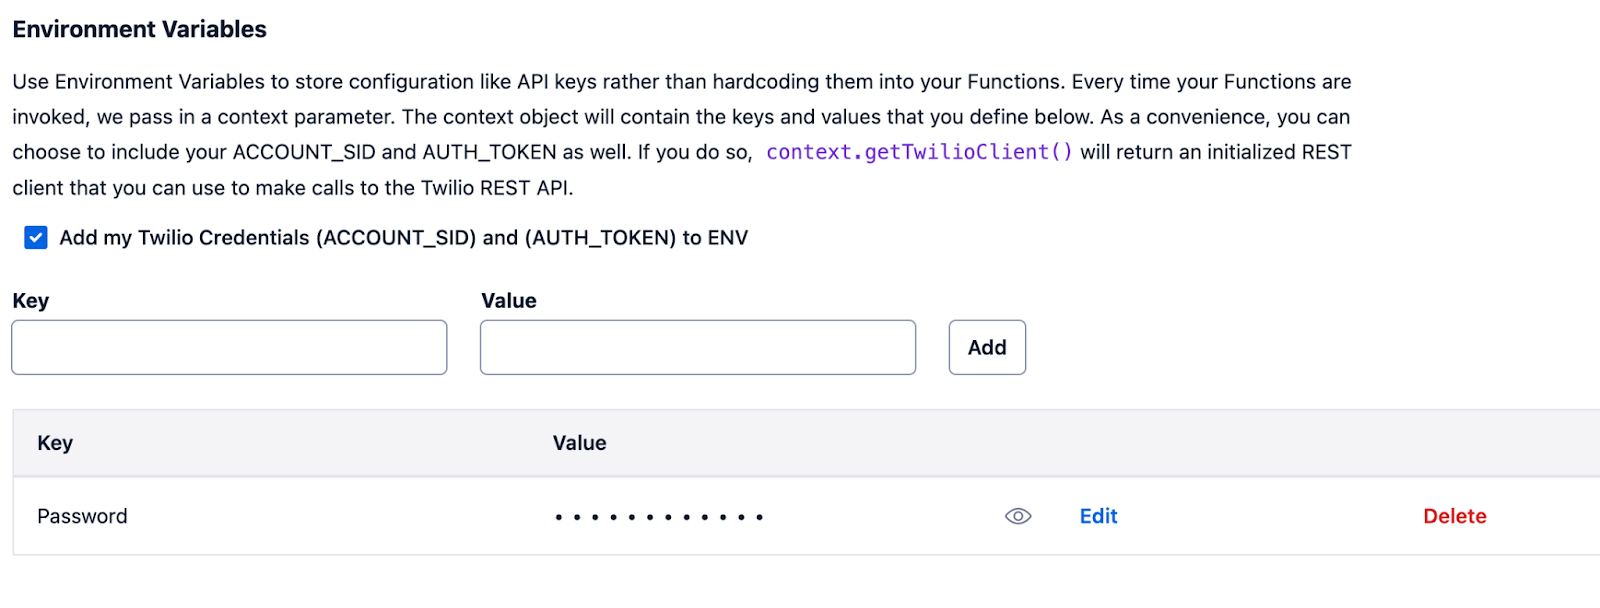 Environmental variables in Twilio Functions